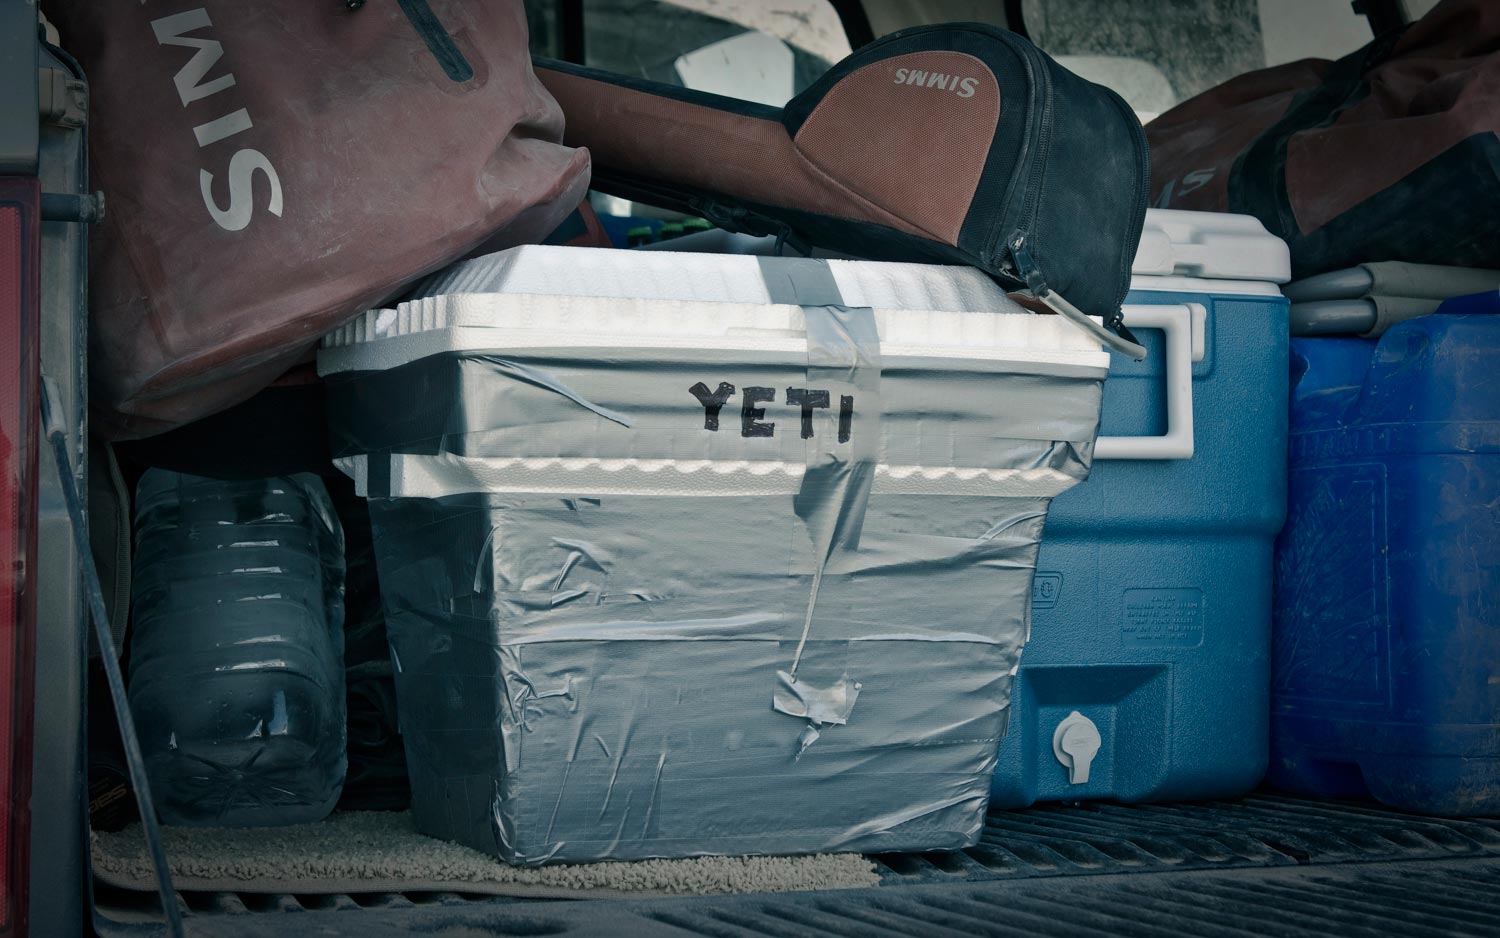 The Homemade Yeti Cooler - Fly Fishing, Gink and Gasoline